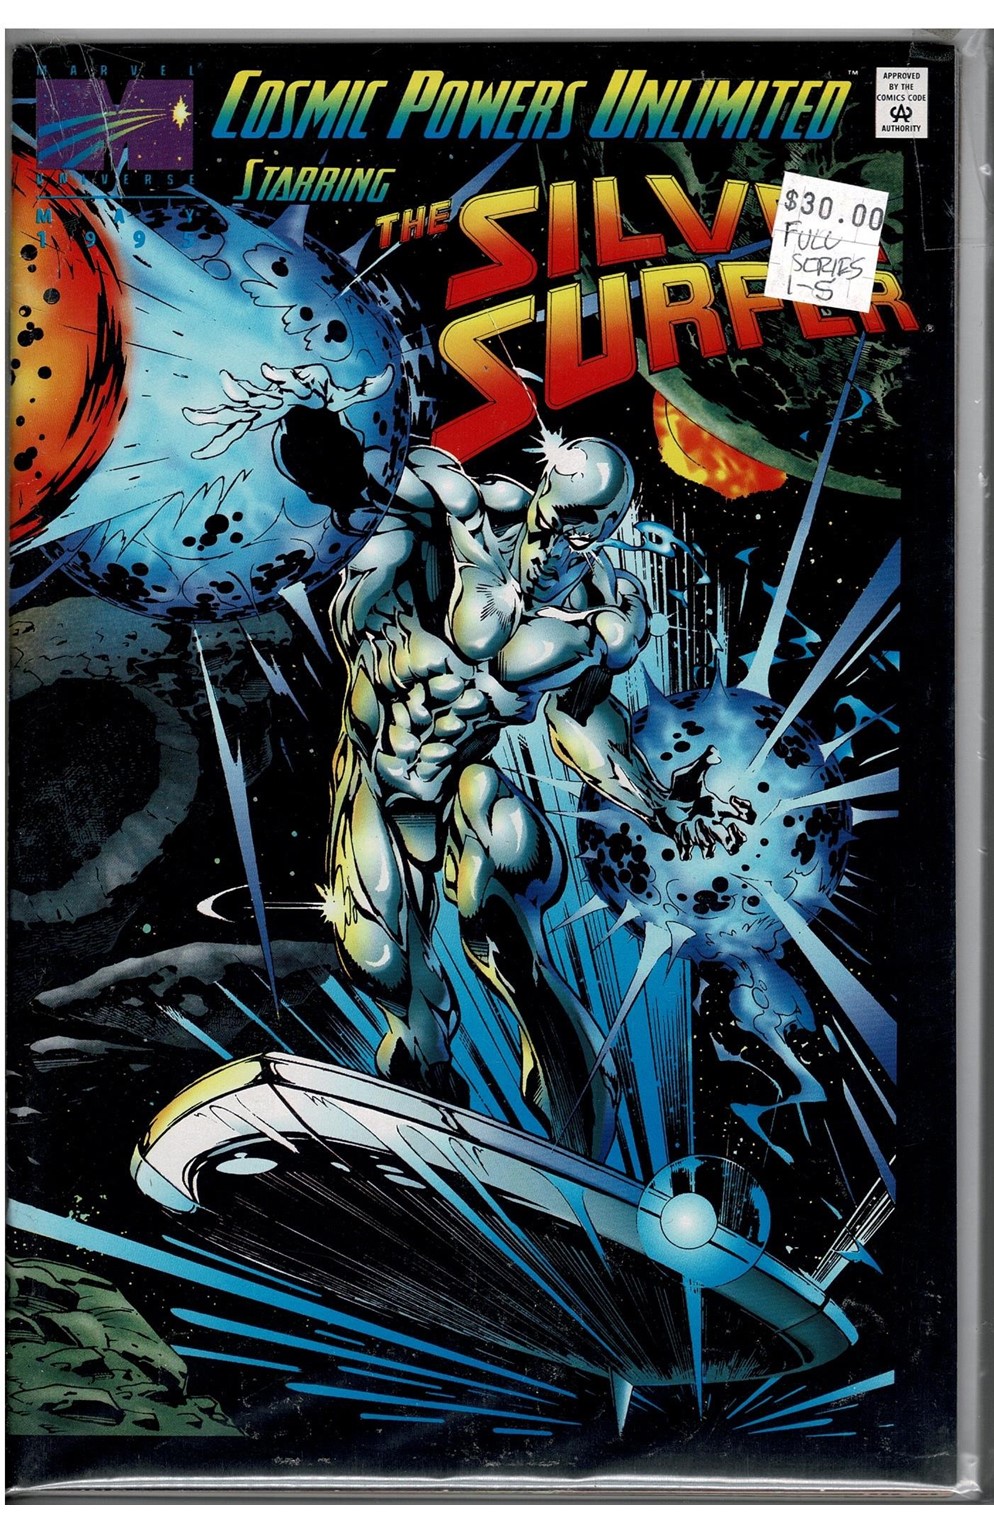 Cosmic Powers Unlimited Staring The Silver Surfer #1-5 Comic Pack